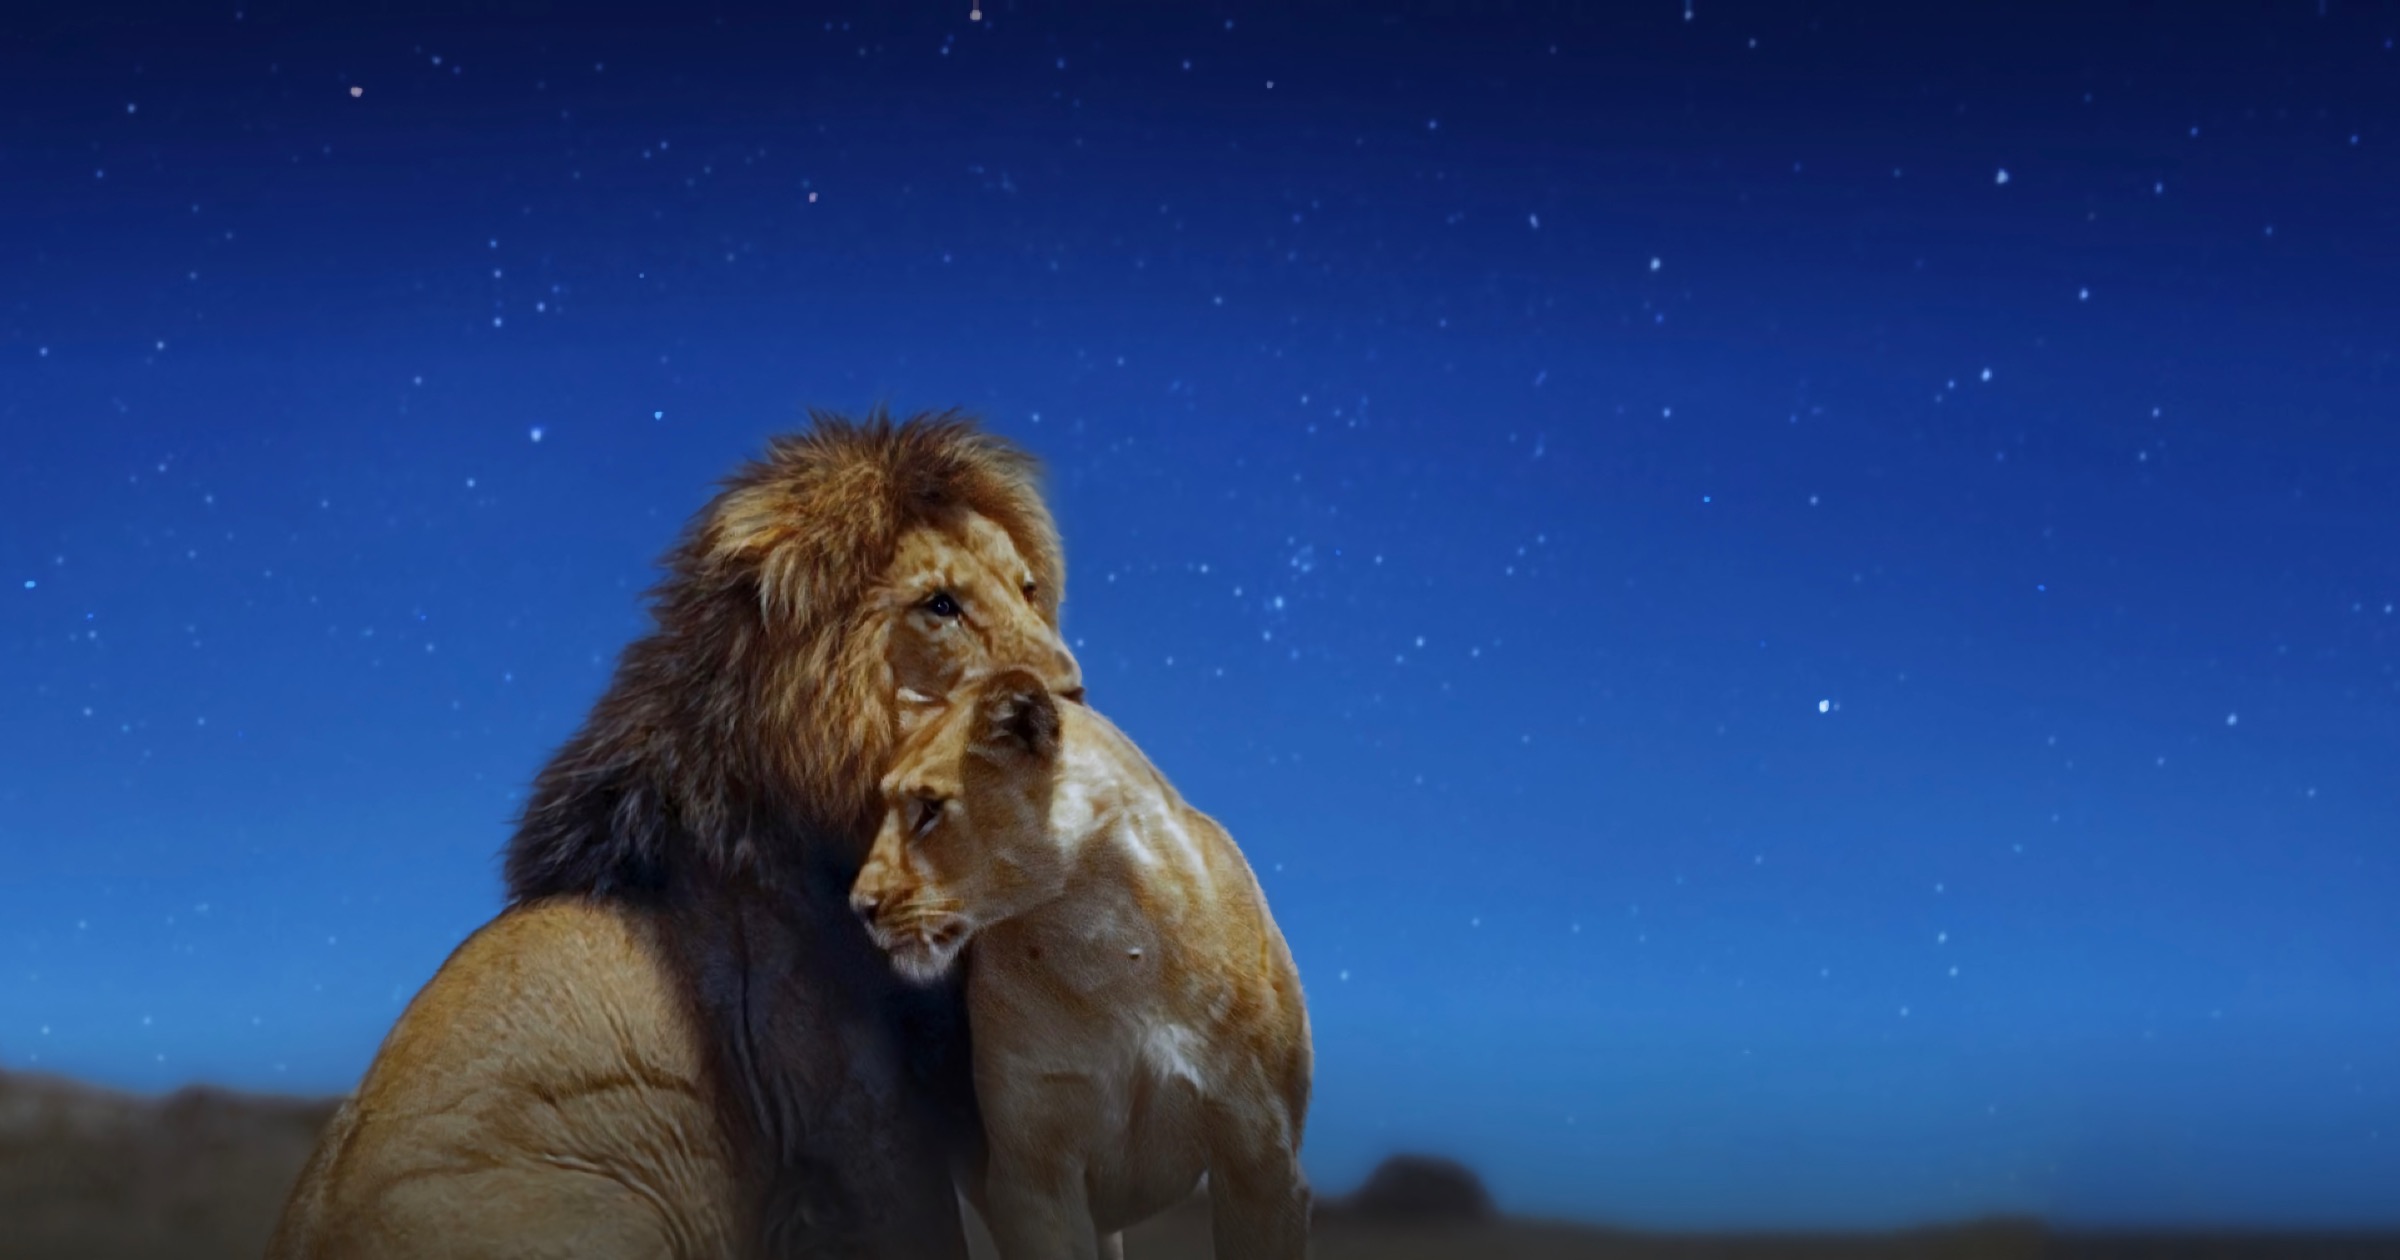 Two lions in earth at night in color